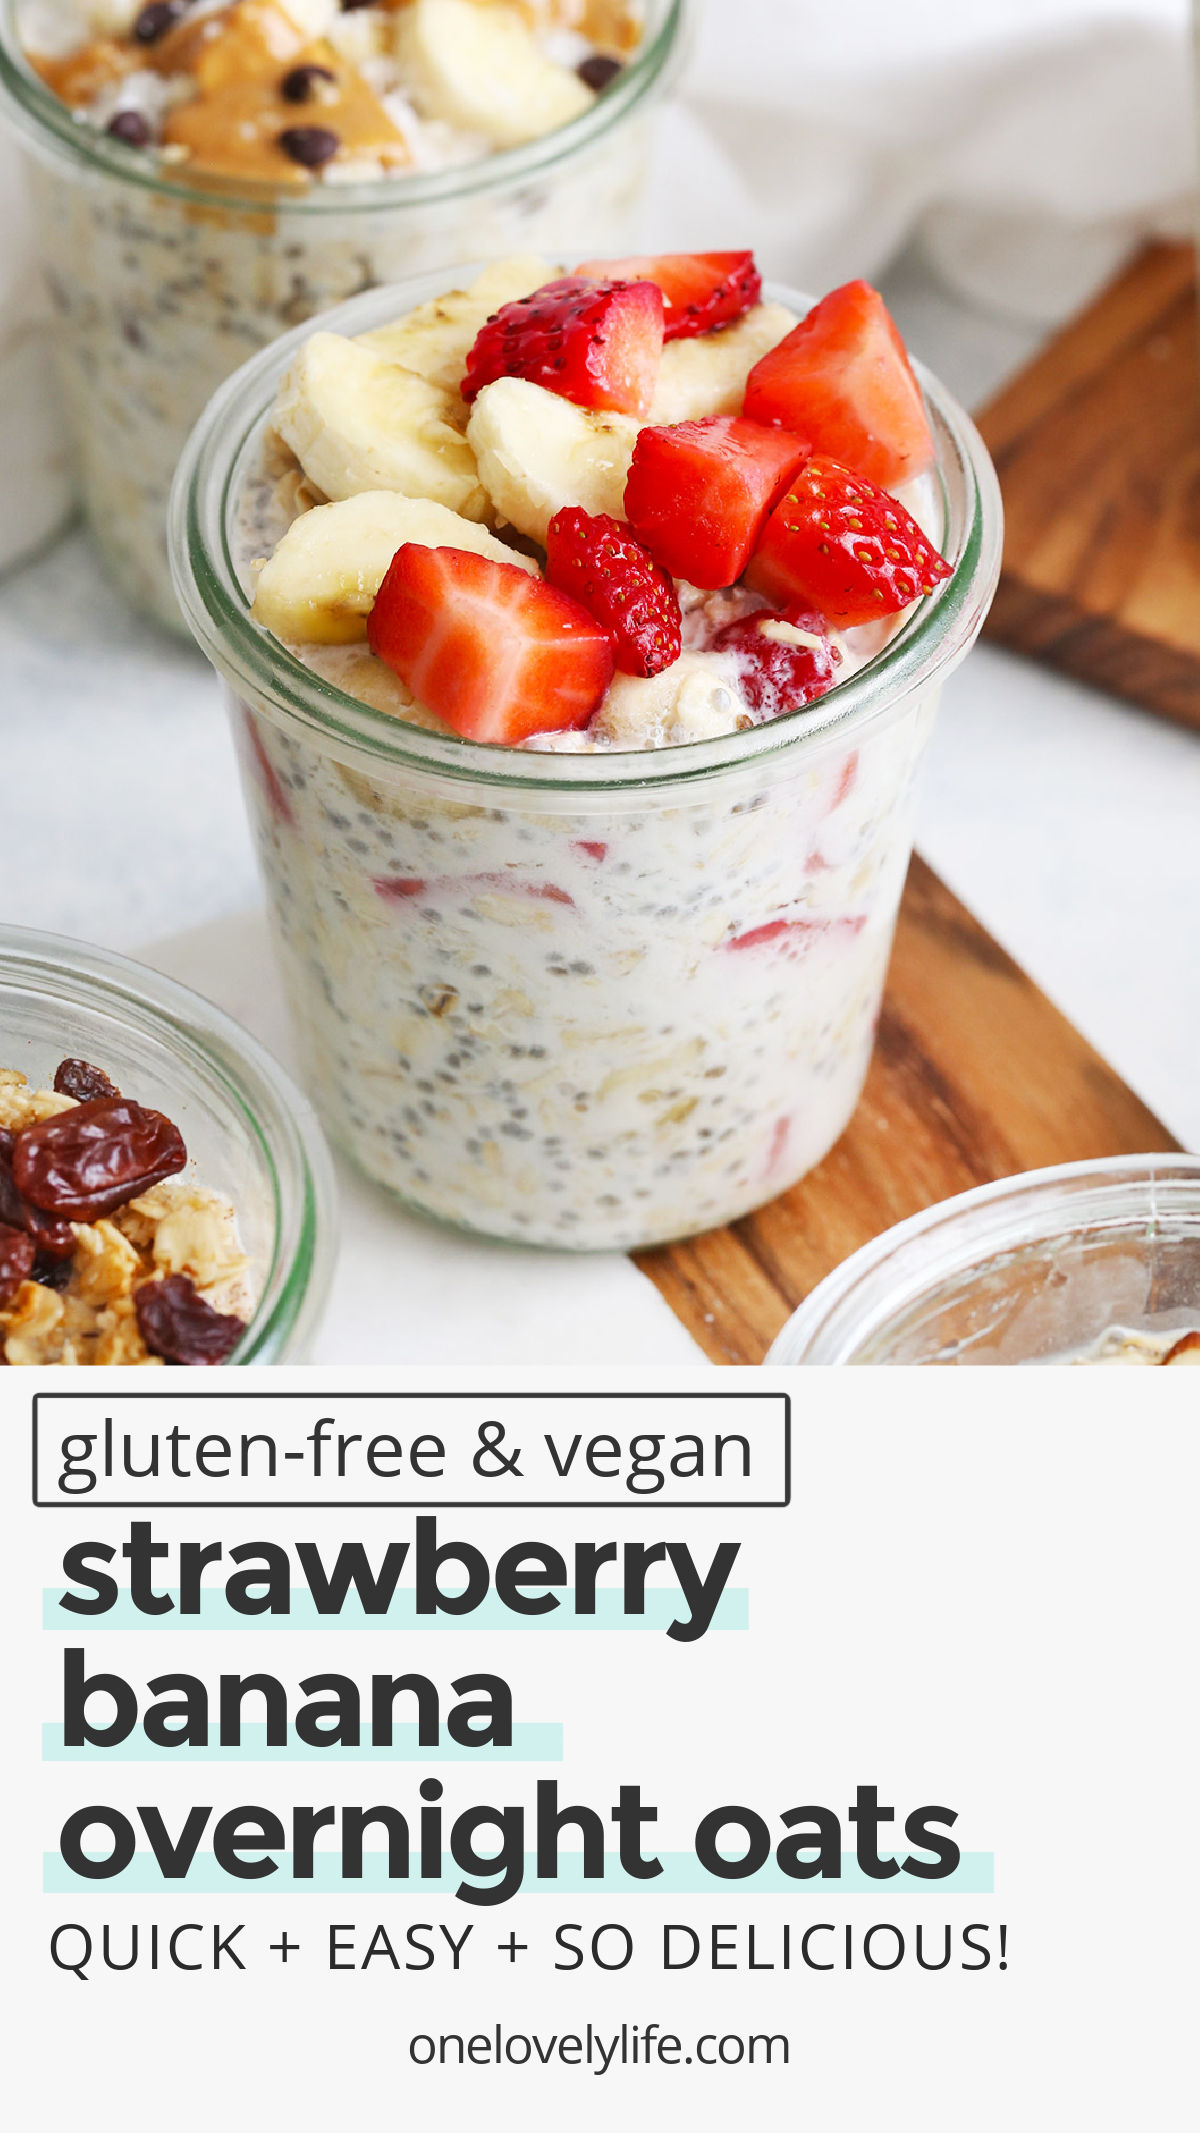 Strawberry Banana Overnight Oats - Creamy overnight oats with bananas and fresh strawberries. This strawberry overnight oats recipe is delicious on a busy morning! (Gluten-free, vegan) // Meal Prep Breakfast // Strawberry Overnight Oats // Healthy Breakfast